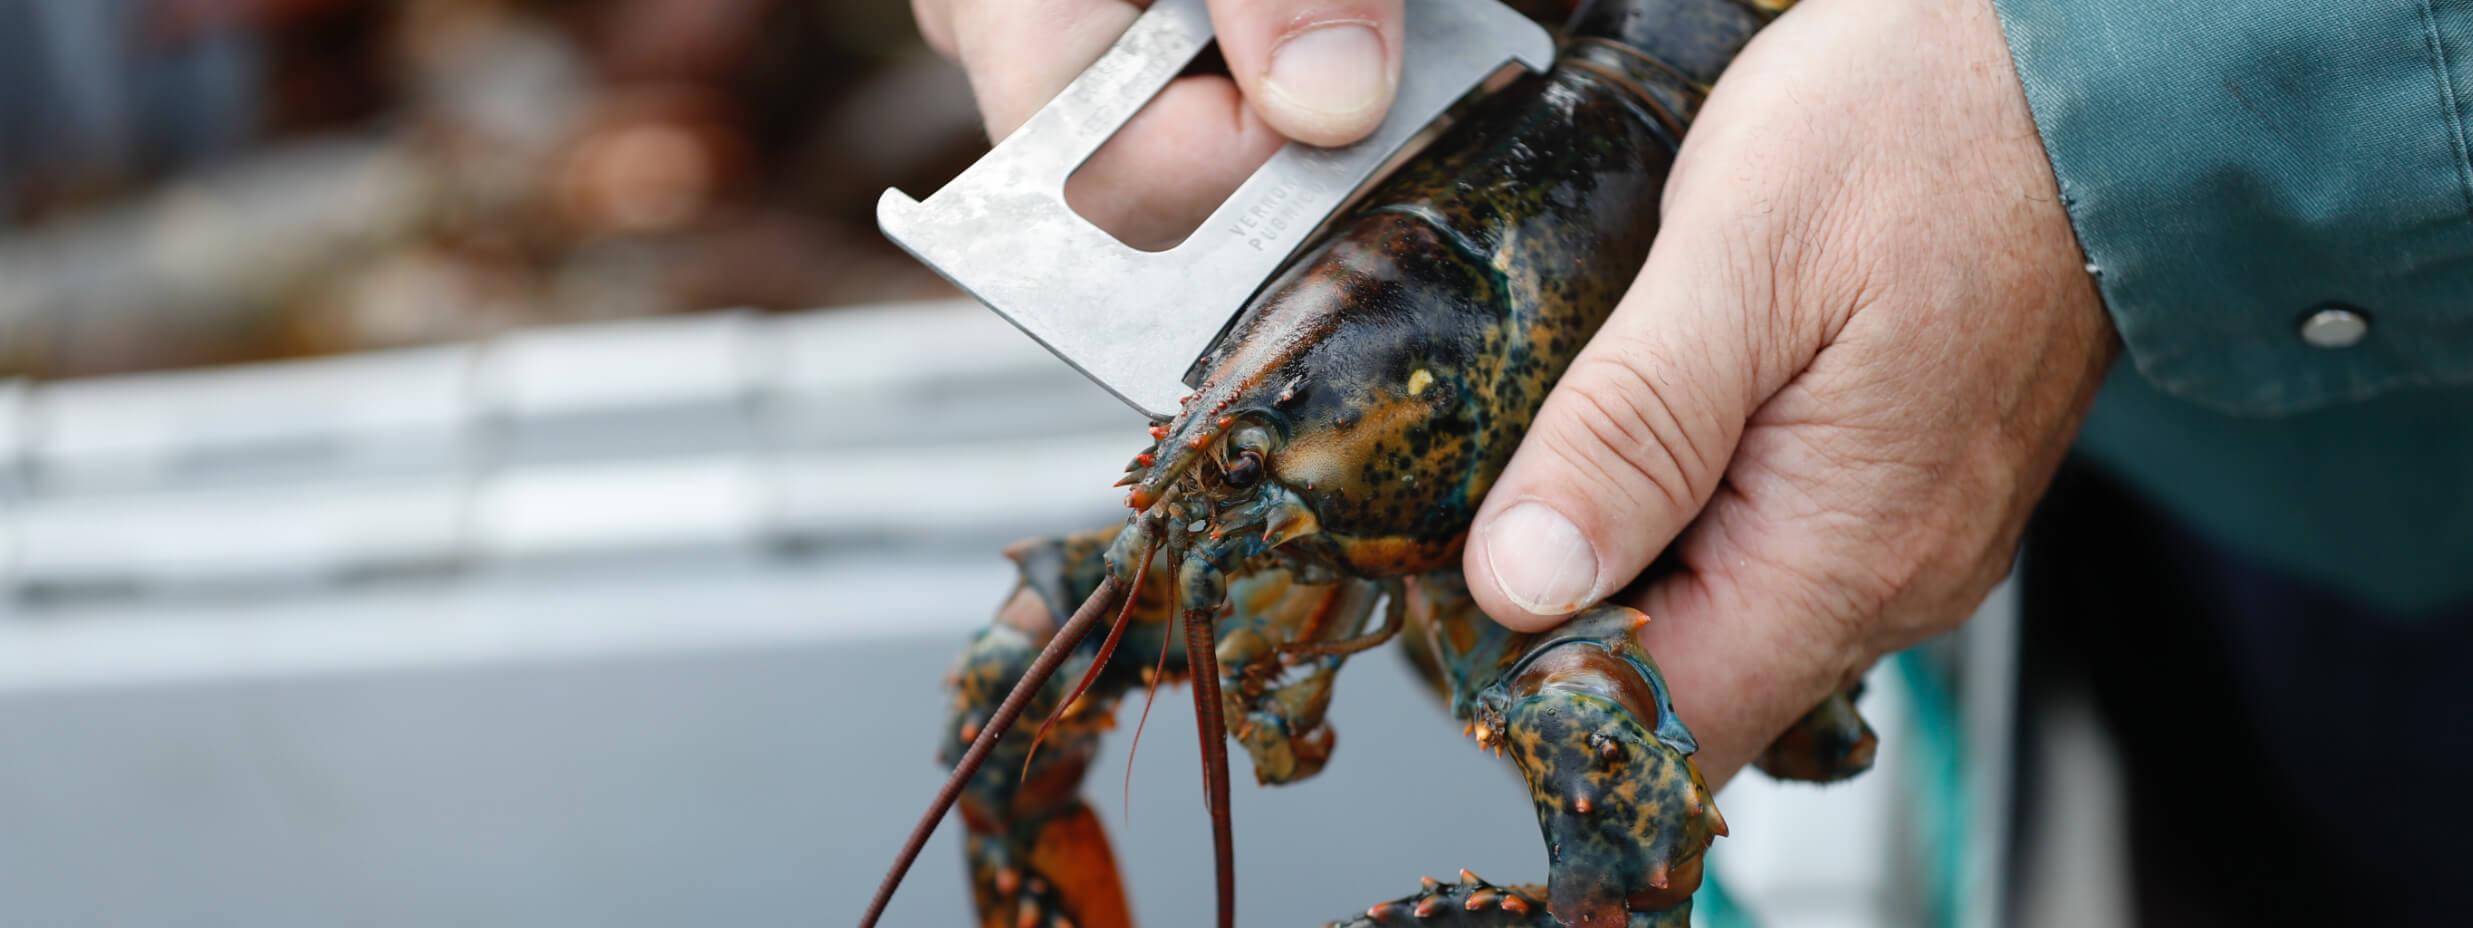 Measuring a lobster size